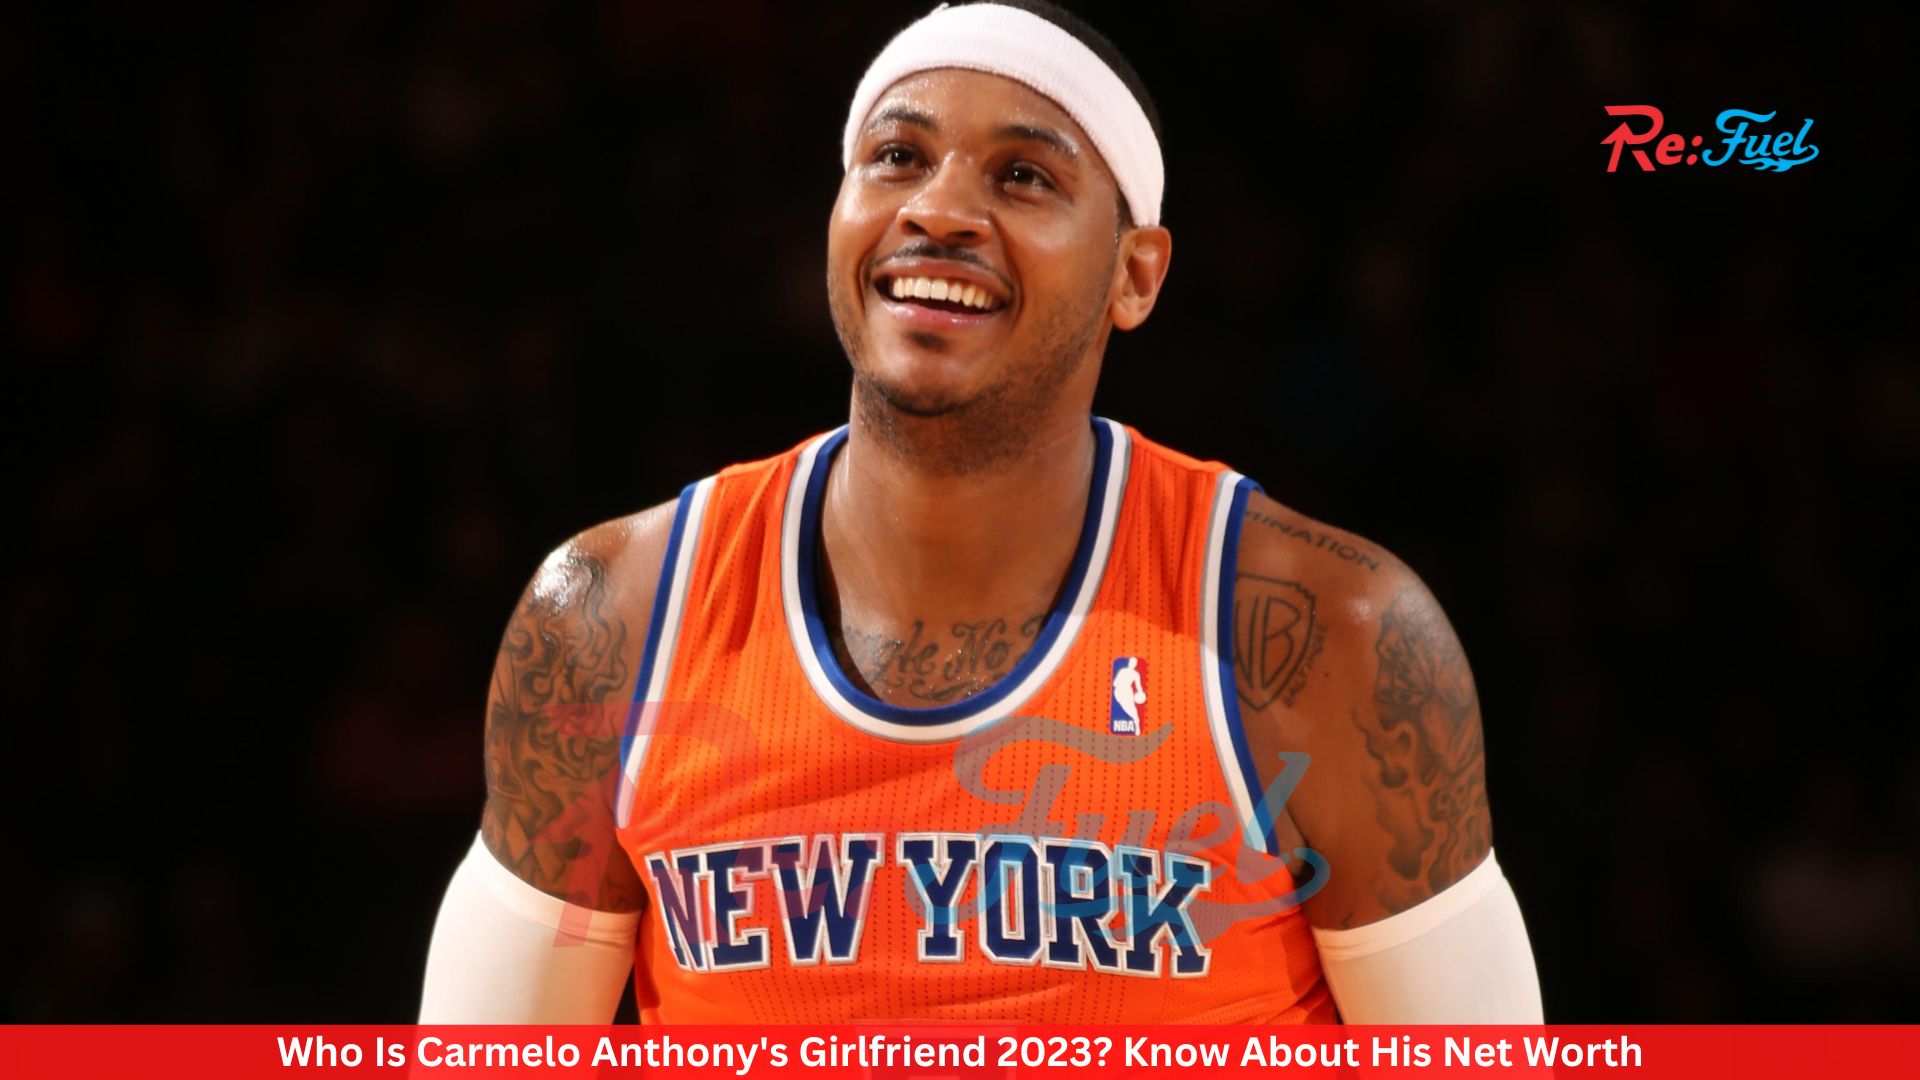 Who Is Carmelo Anthony's Girlfriend 2023? Know About His Net Worth